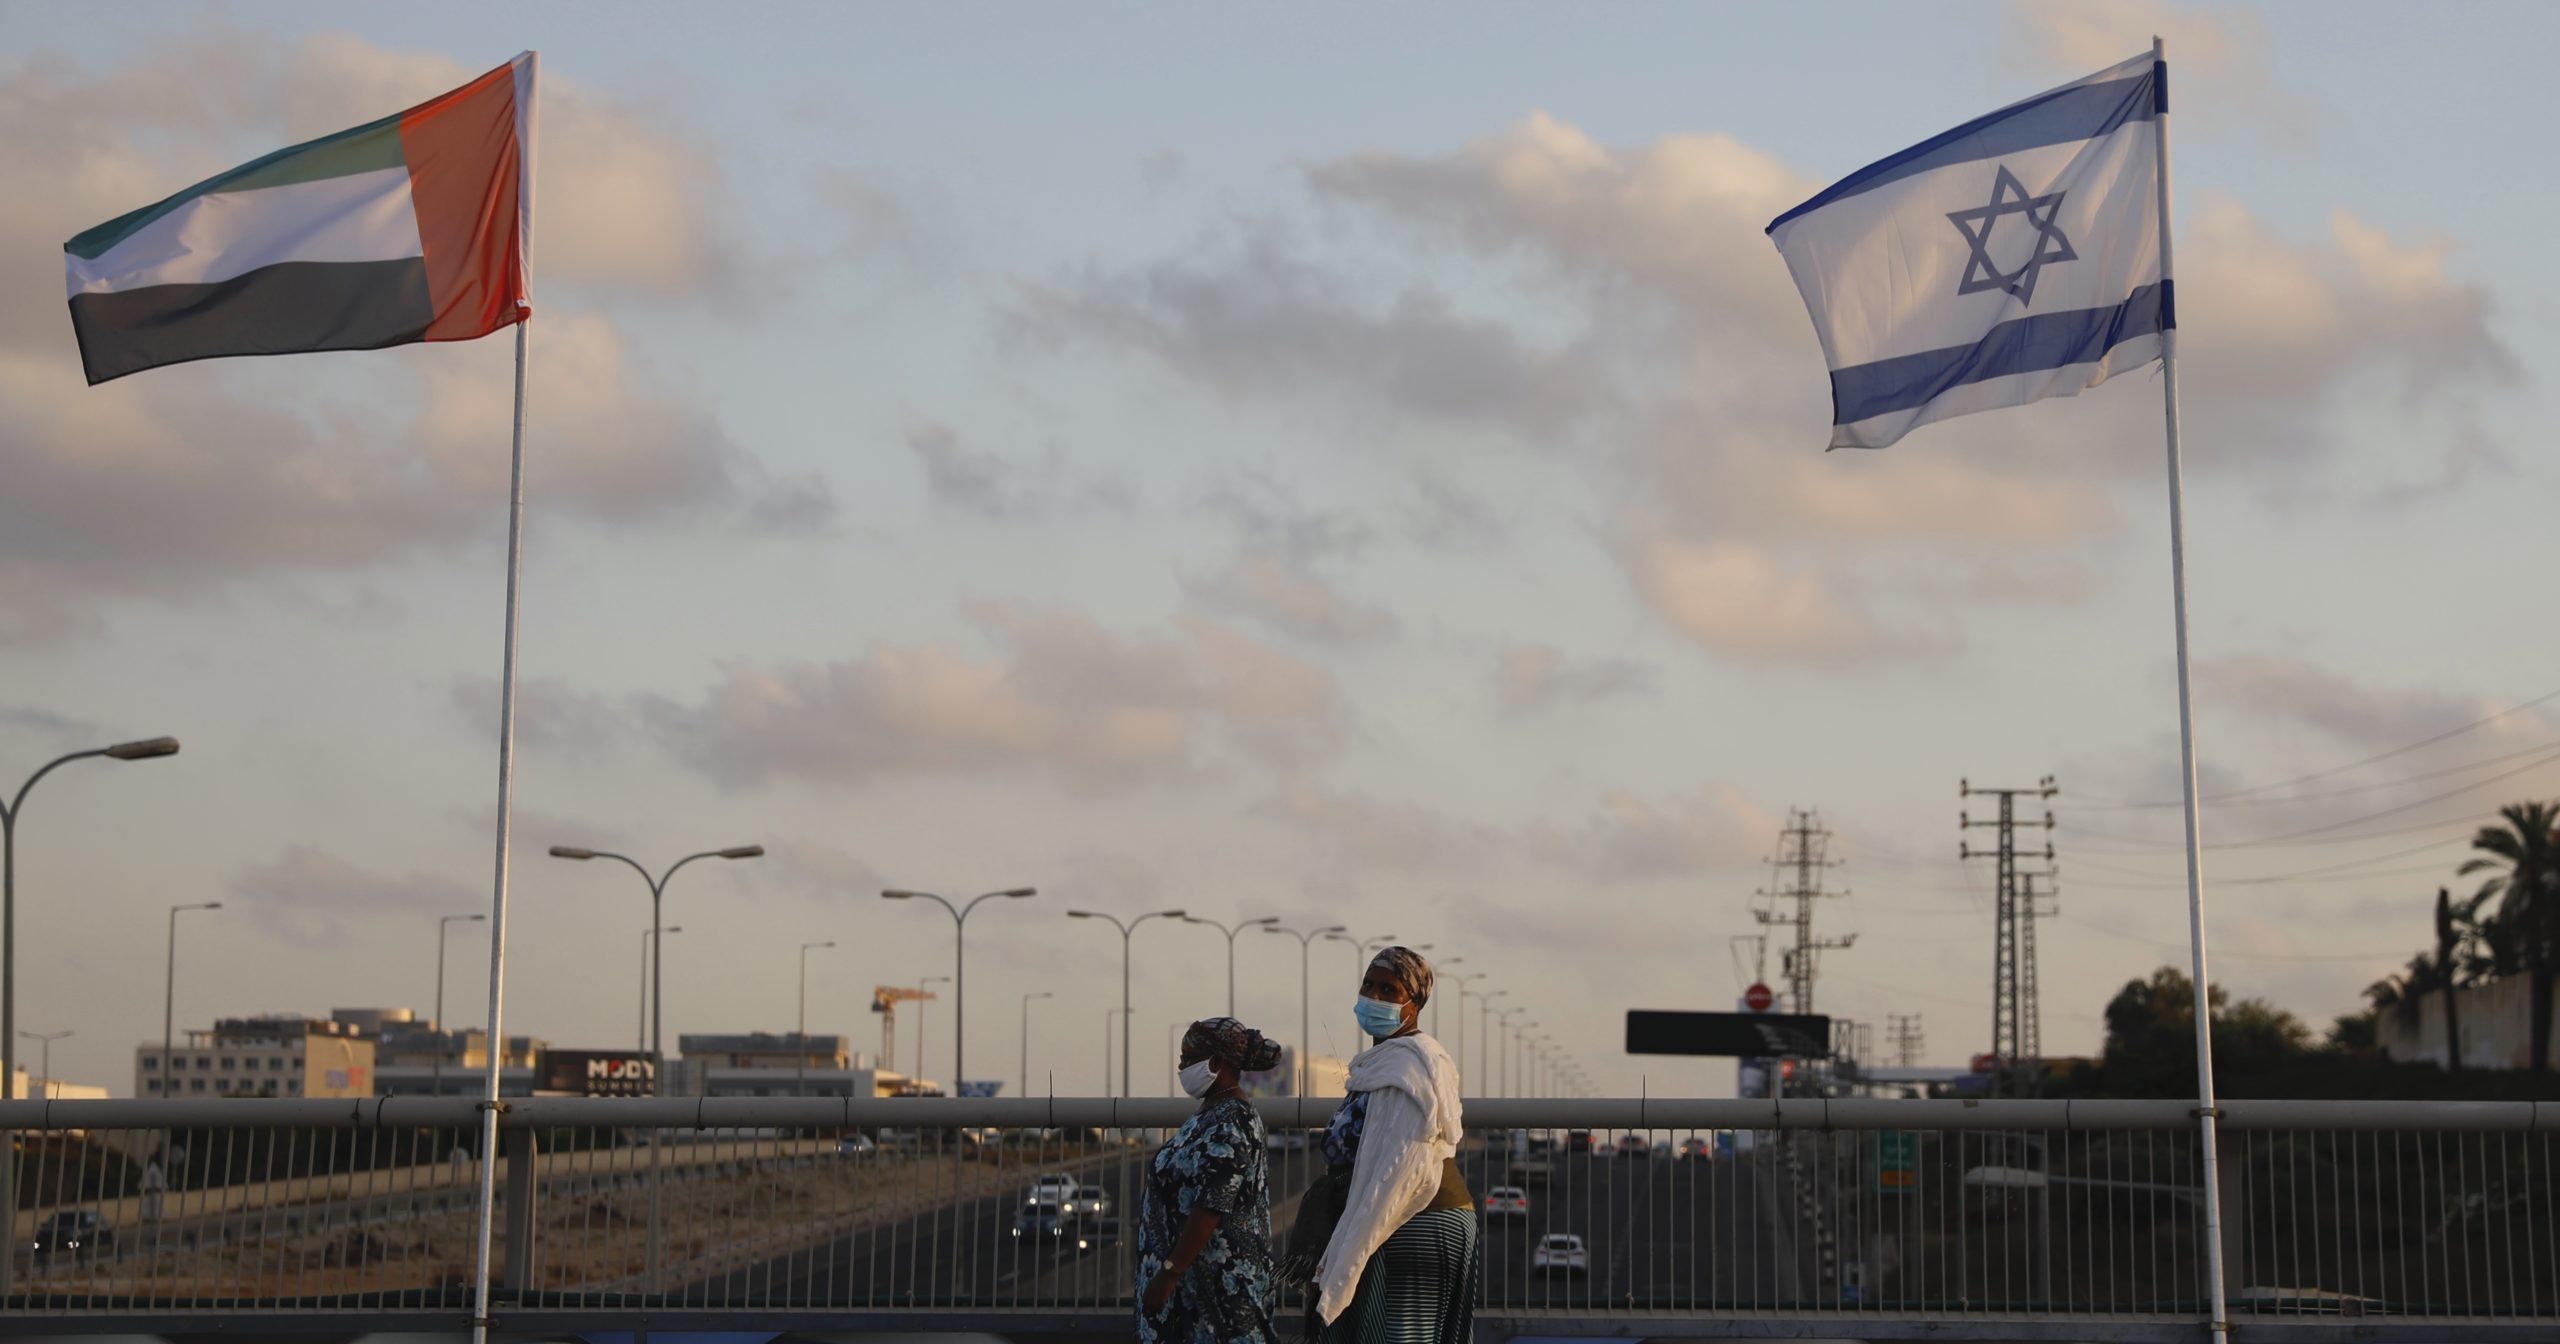 Women walk past United Arab Emirates and Israeli flags at the Peace Bridge in Netanya, Israel, on Aug. 16, 2020. The UAE flag was displayed to celebrate last week's announcement that Israel and the United Arab Emirates have agreed to establish full diplomatic relations.